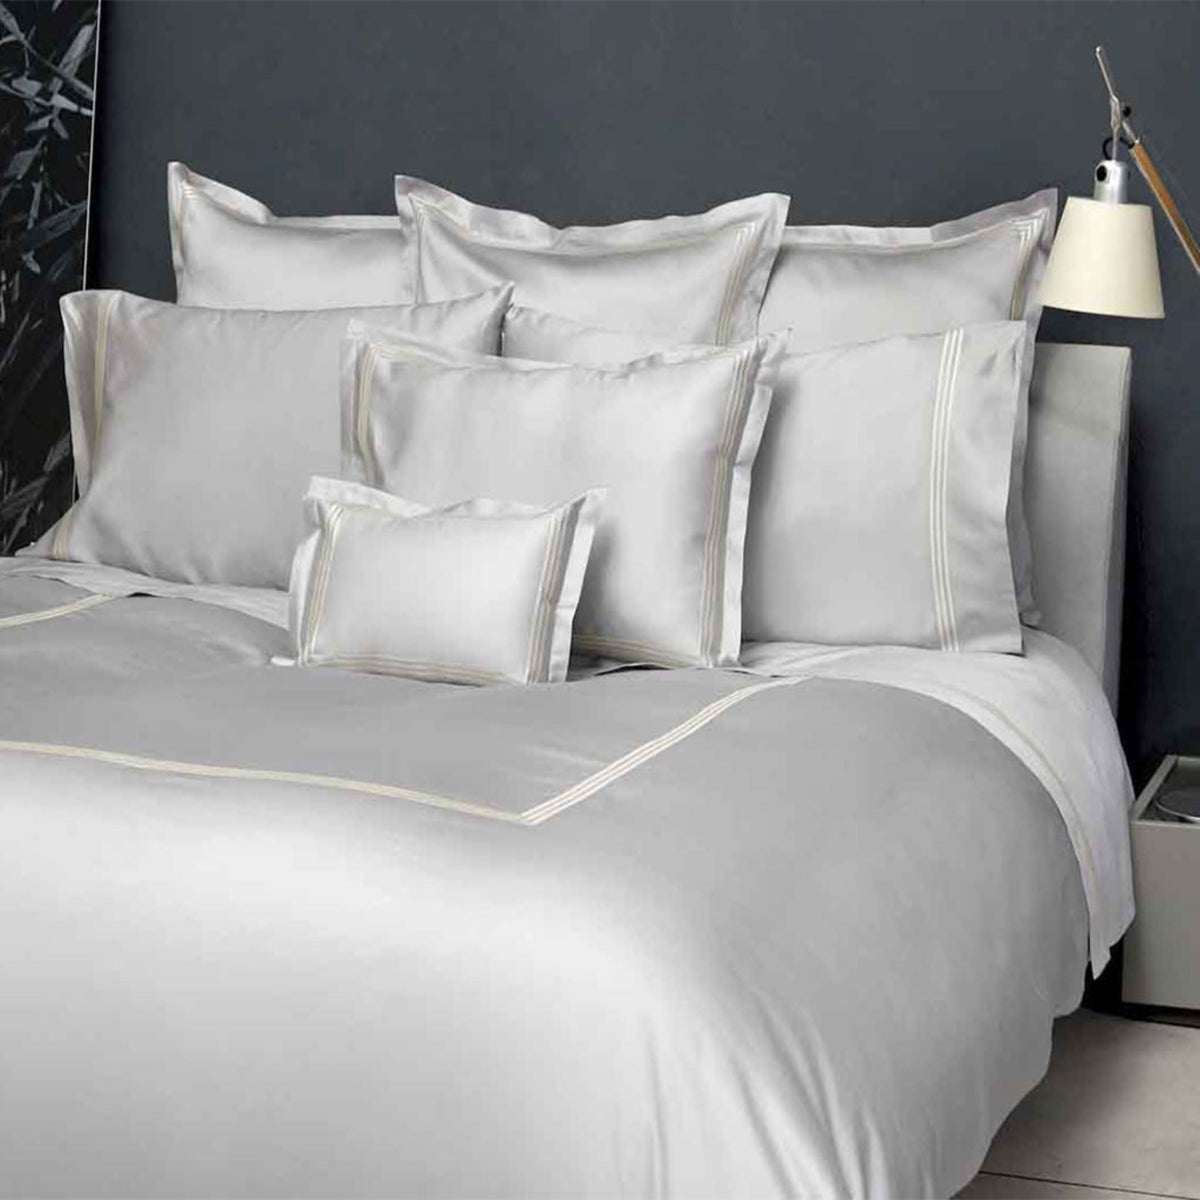 Full Bed Dressed in Signoria Platinum Sateen Bedding with Pearl/Ivory Color